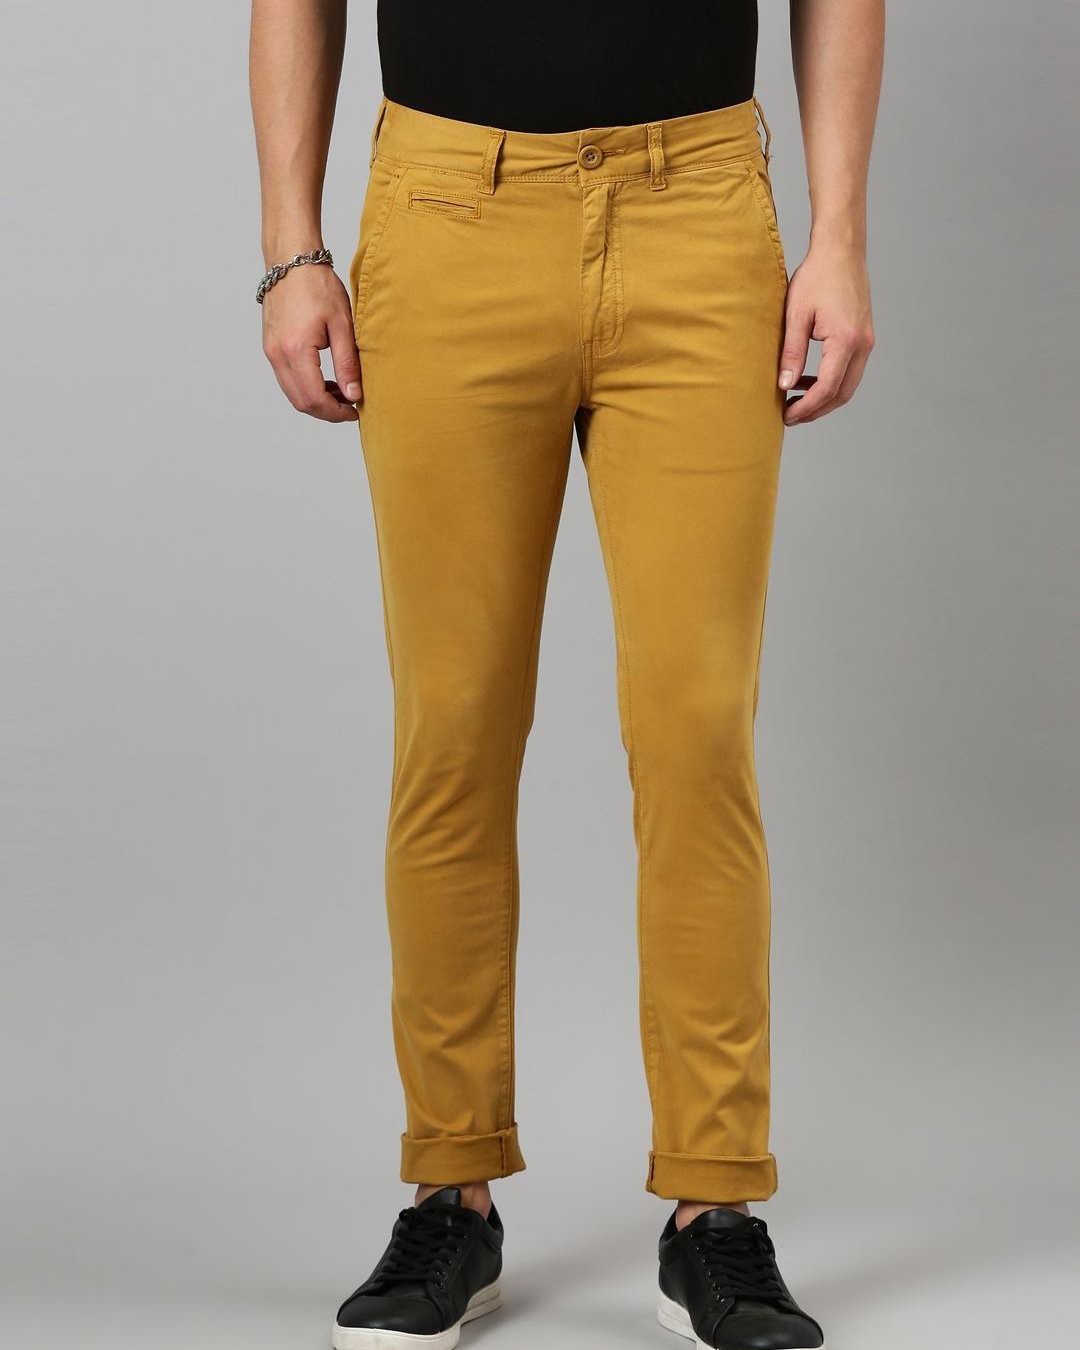 Mustard Pants for Spring - The Closet Crush